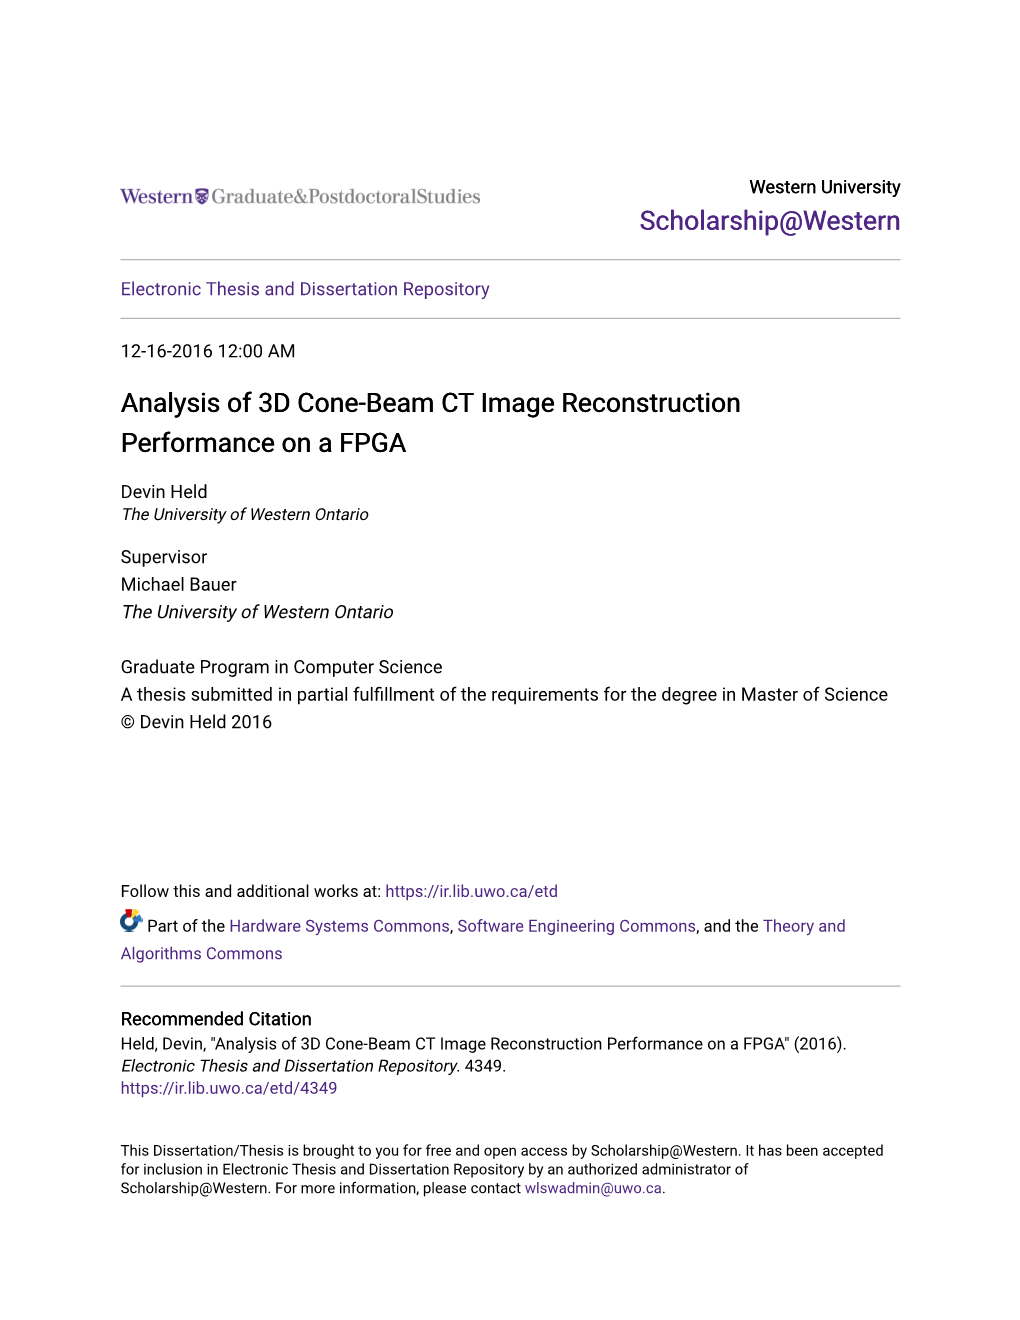 Analysis of 3D Cone-Beam CT Image Reconstruction Performance on a FPGA